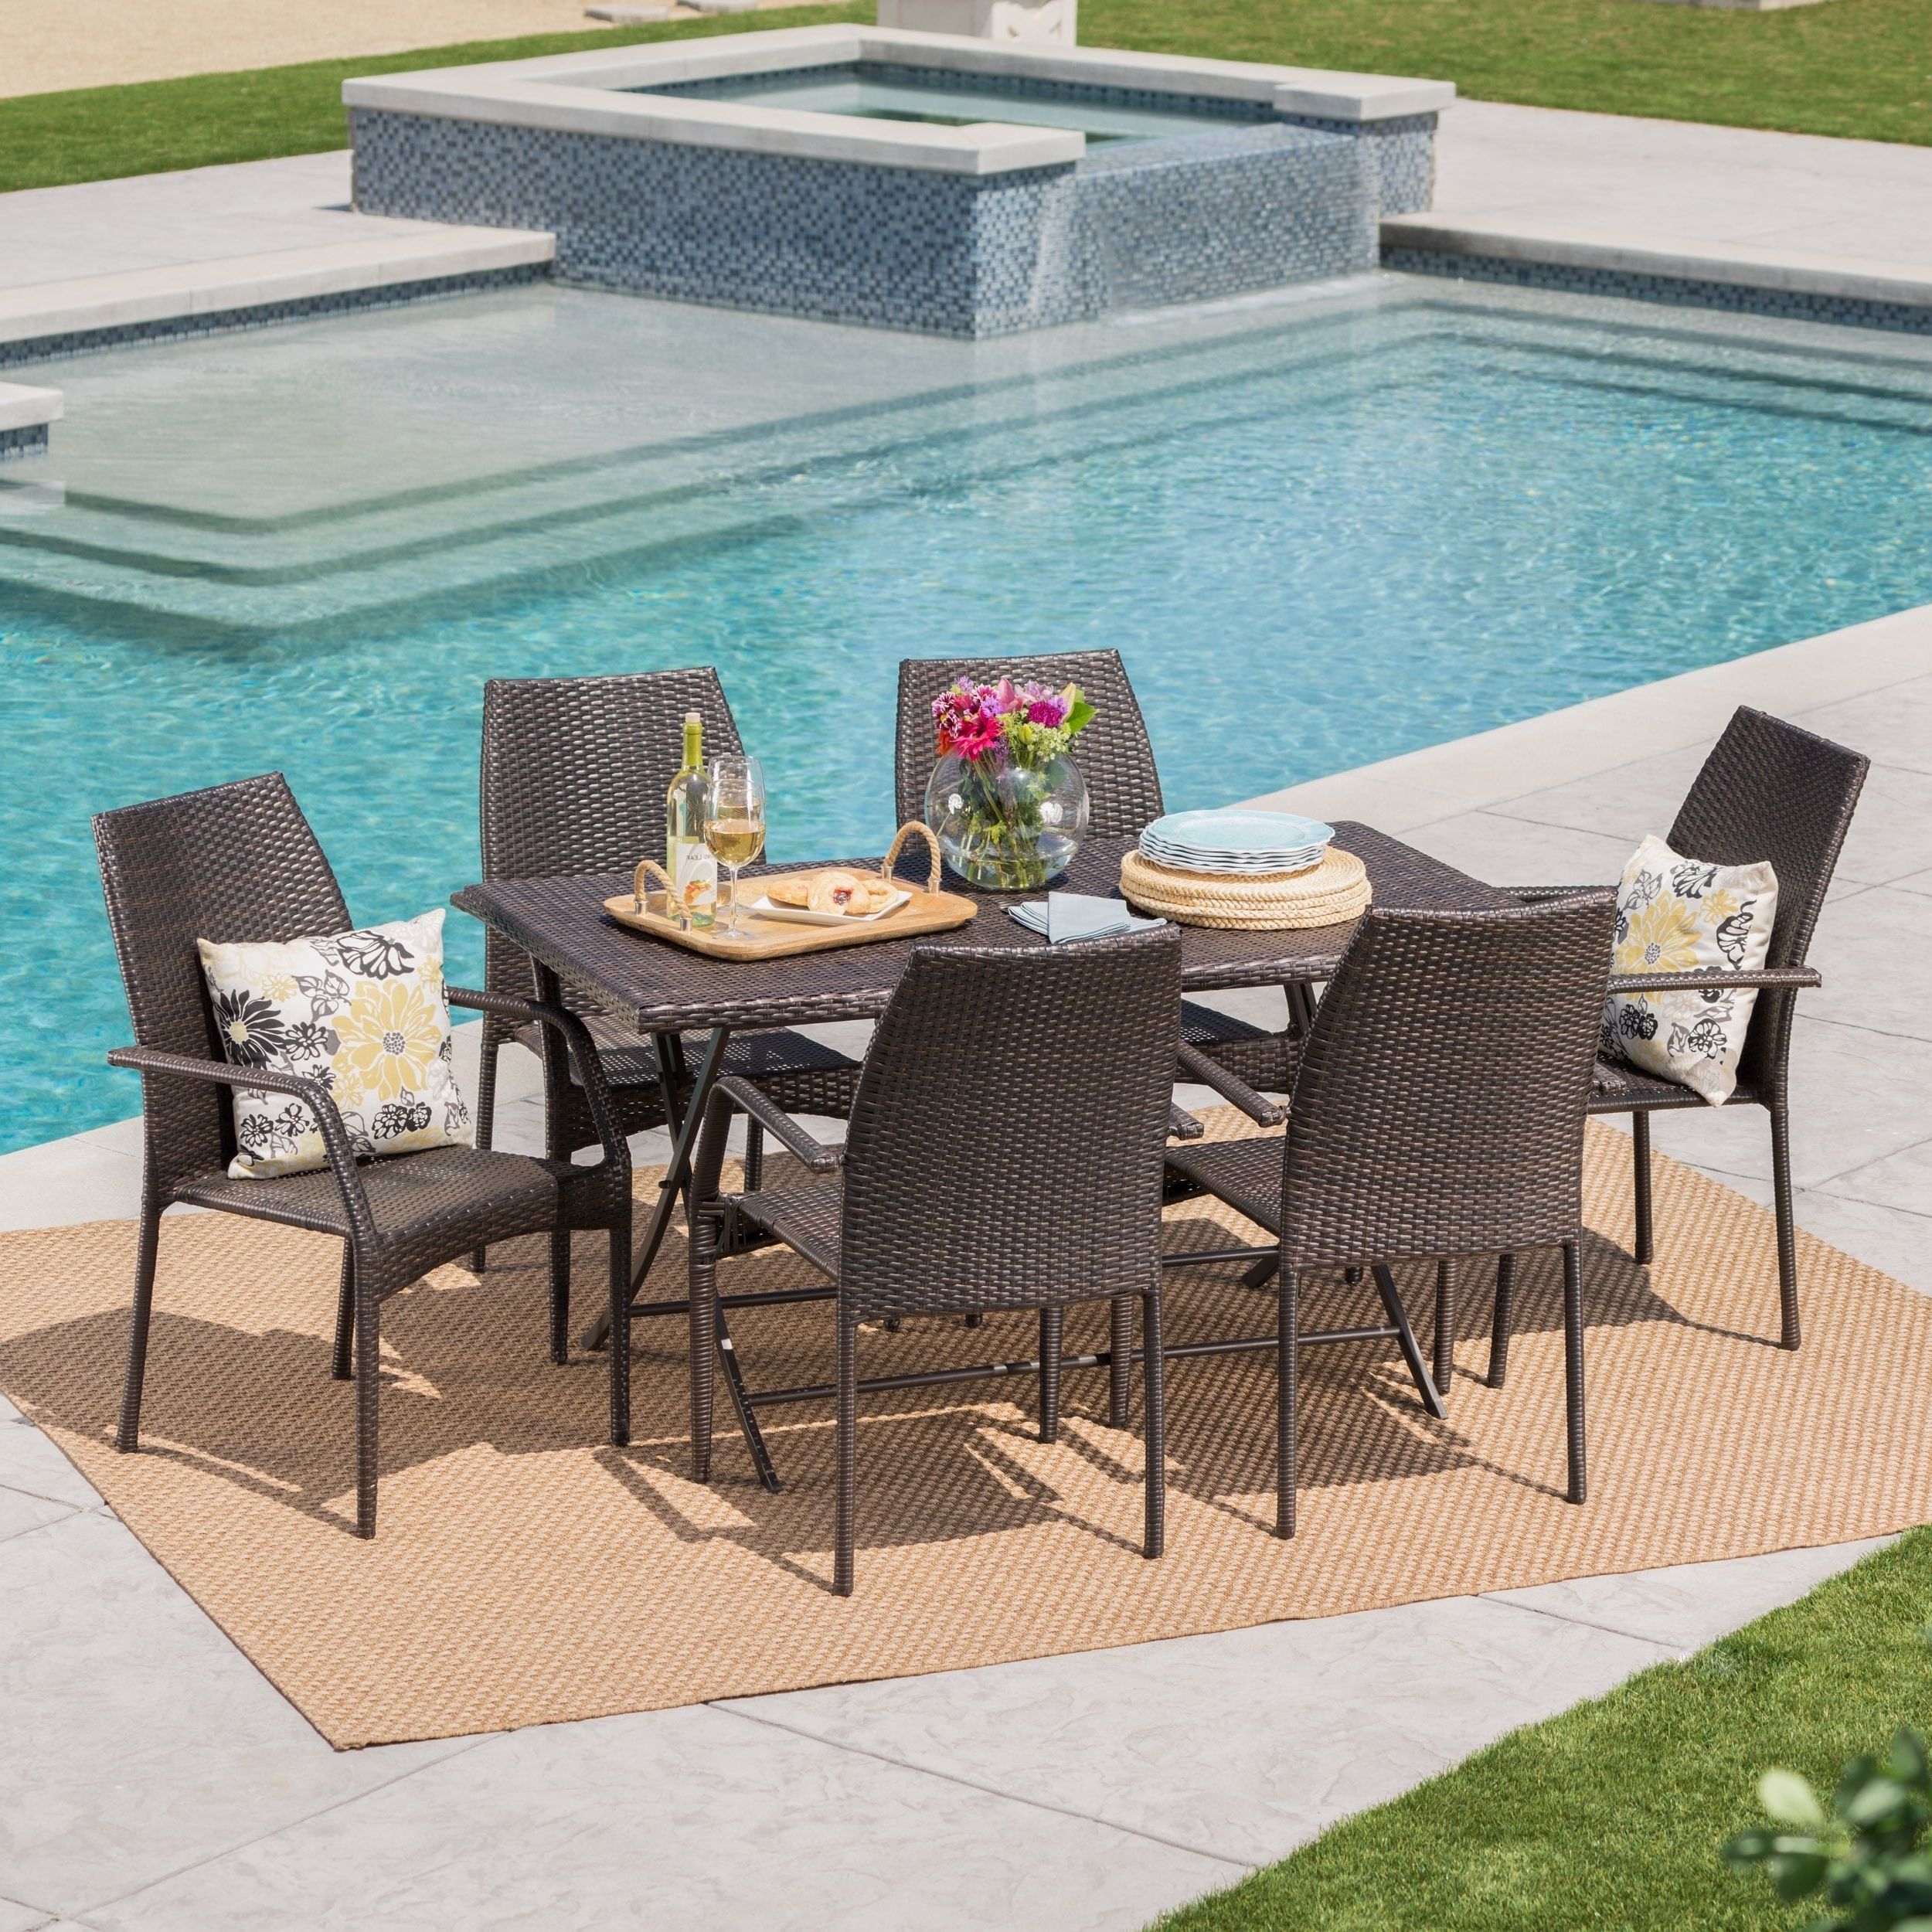 Widely Used Brown Wicker Rectangular Patio Dining Sets In April Outdoor 7 Piece Rectangle Foldable Wicker Dining Set Brown N/a (View 3 of 15)